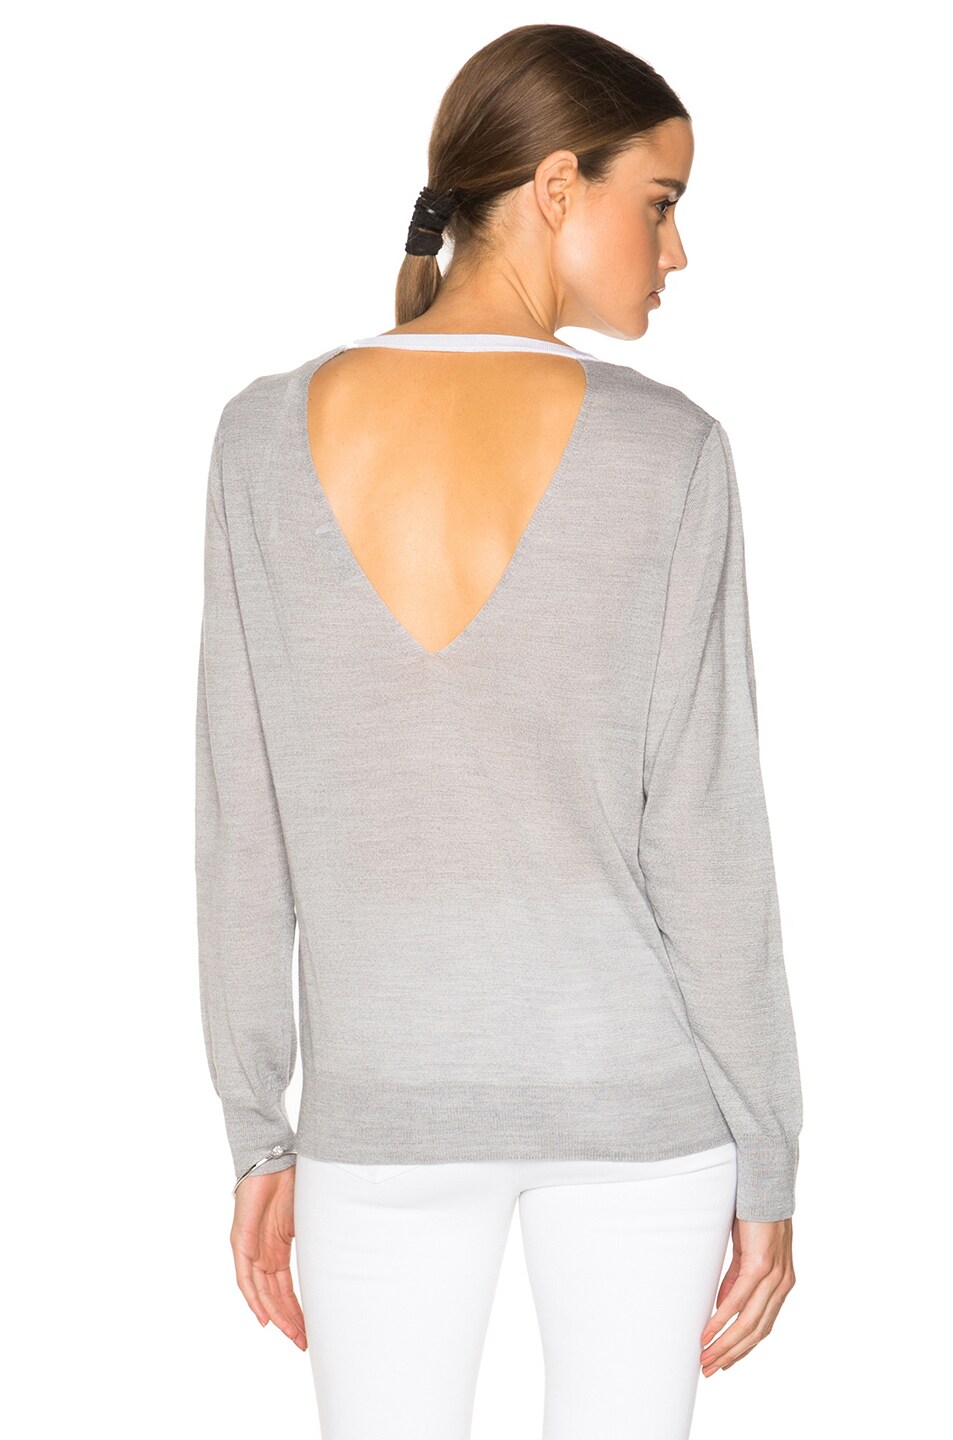 Image 1 of Opening Ceremony Trompe L'Oeil Top in Heather Grey Multi